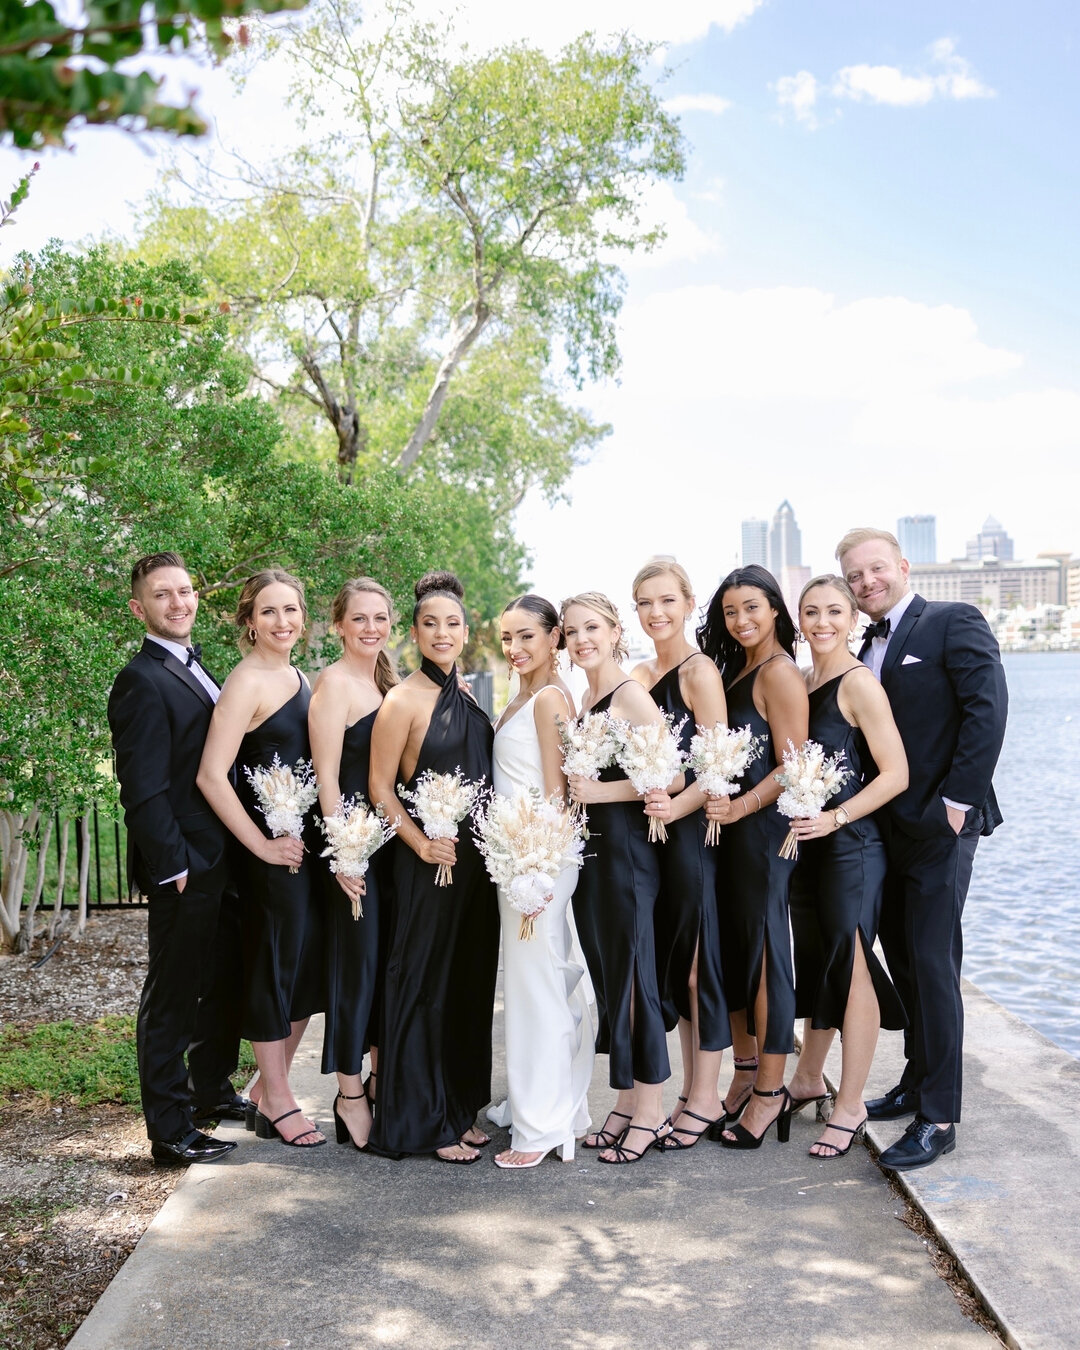 All Black, White and Chic&hellip; This wedding party killed it​​​​​​​​
​​​​​​​​
*​​​​​​​​
*​​​​​​​​
*​​​​​​​​
​​​​​​​​
#weddingparty #chicwedding #weddingcolors #romanticwedding #weddingtips #weddinginspir #weddingflowerinspiration #floridaweddings #